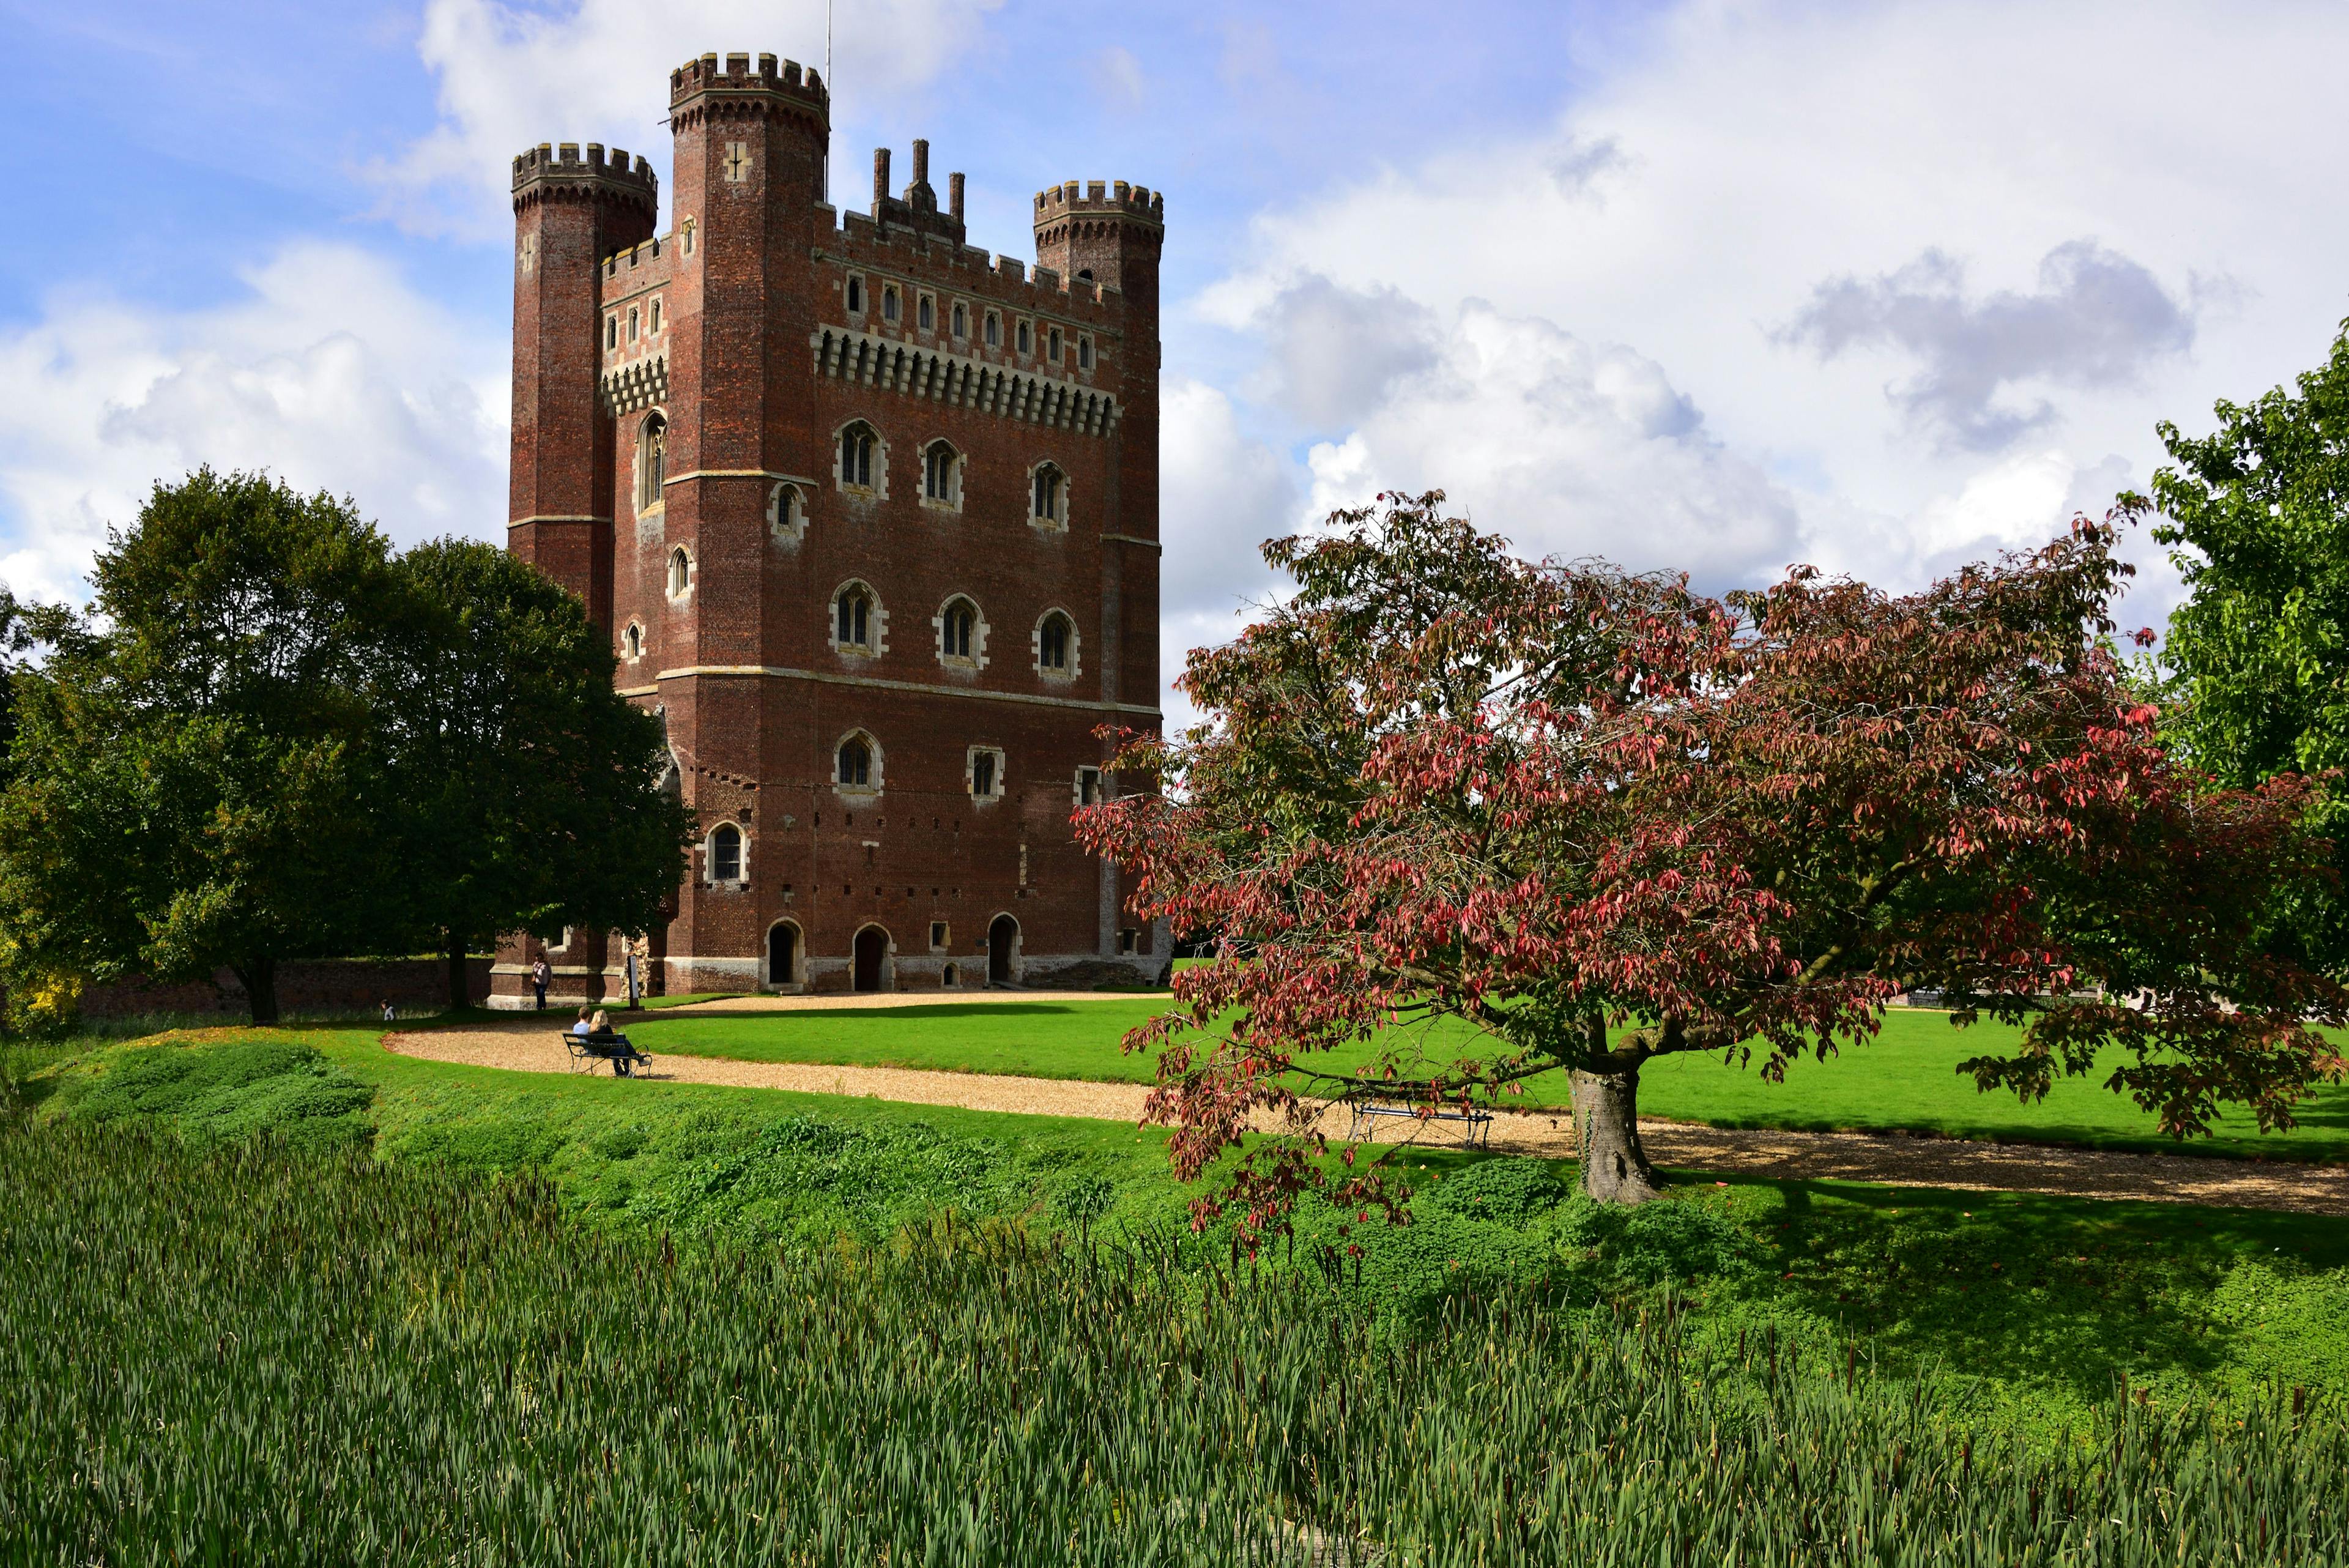 Tattershall Castle in Lincolnshire